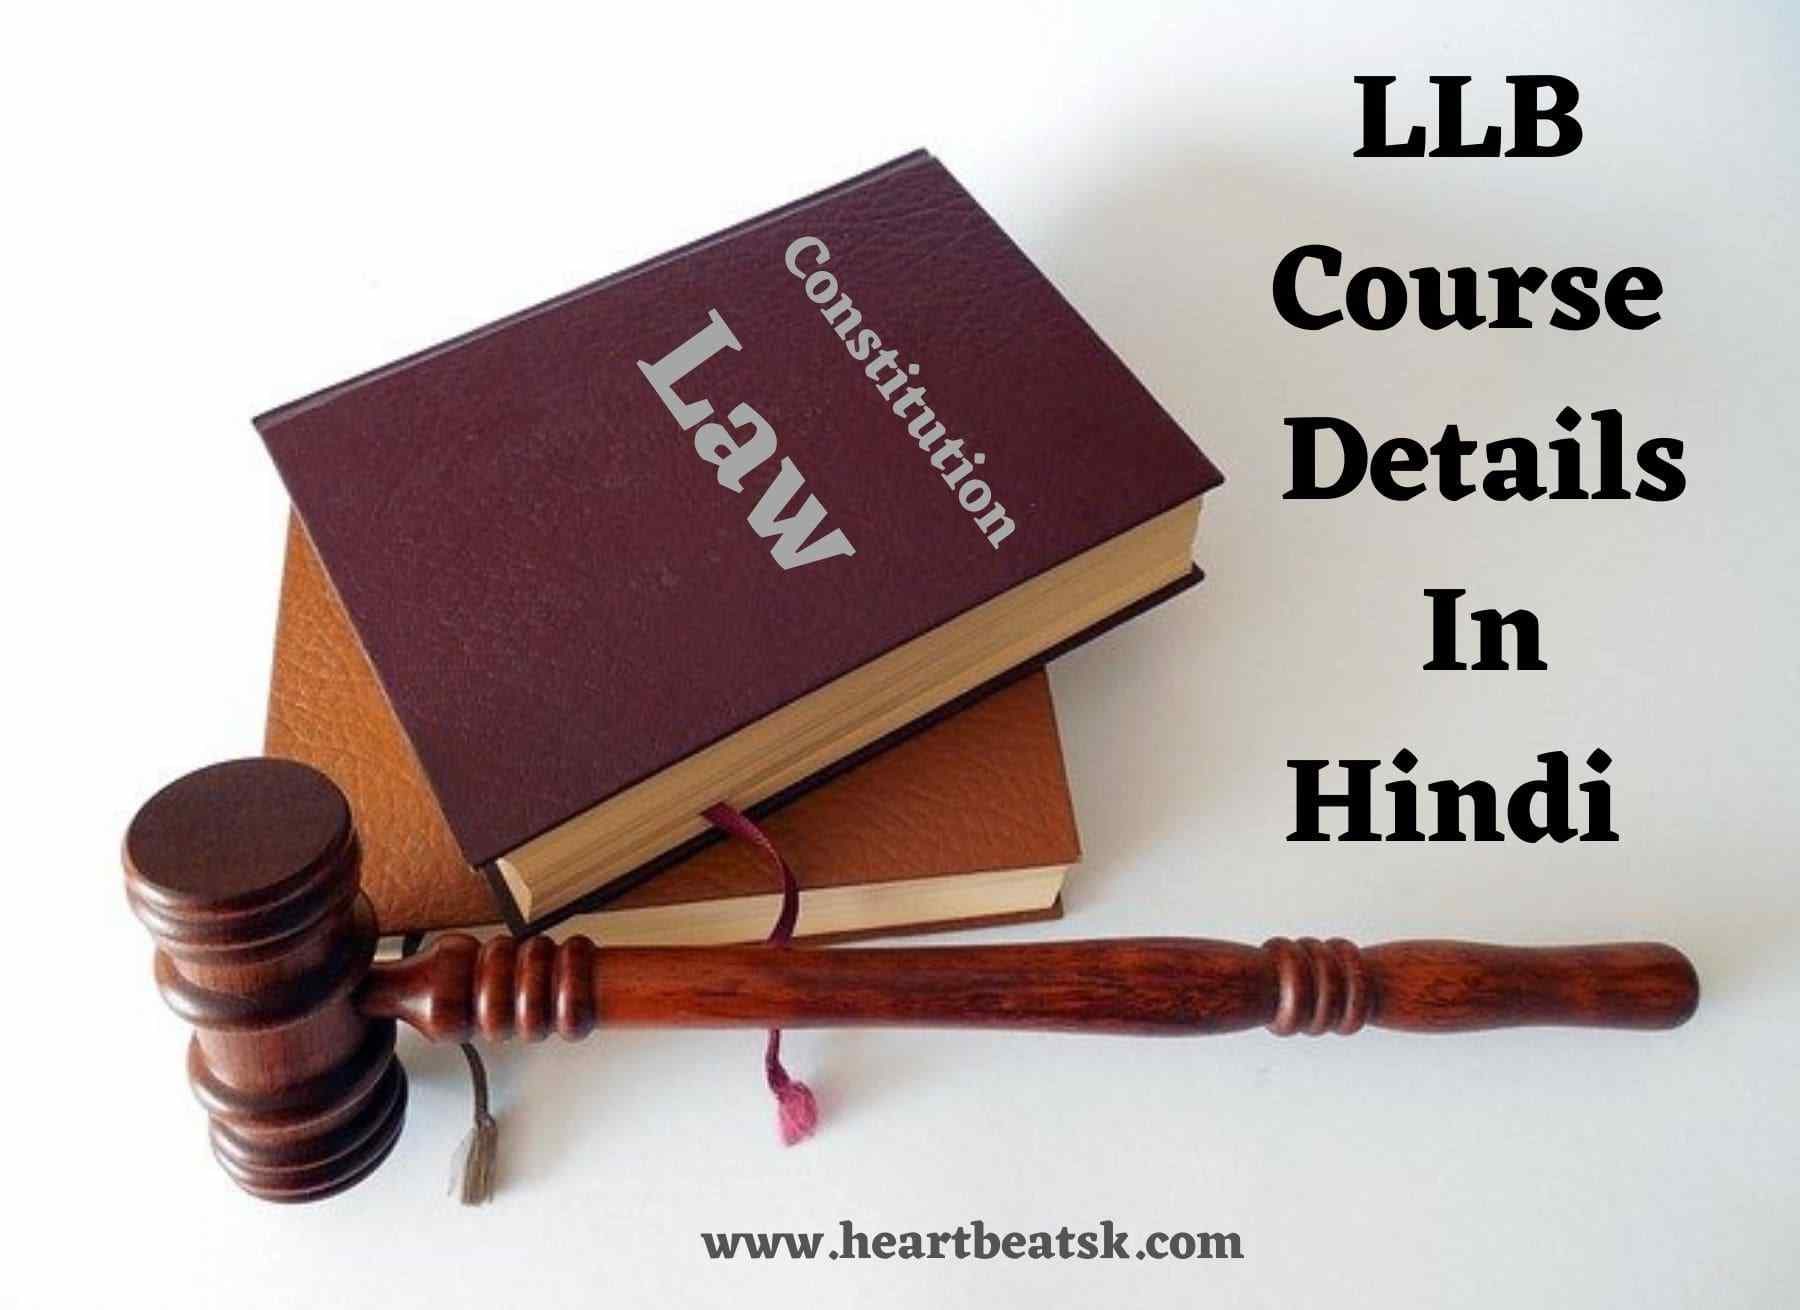 LLB Course Details In Hind